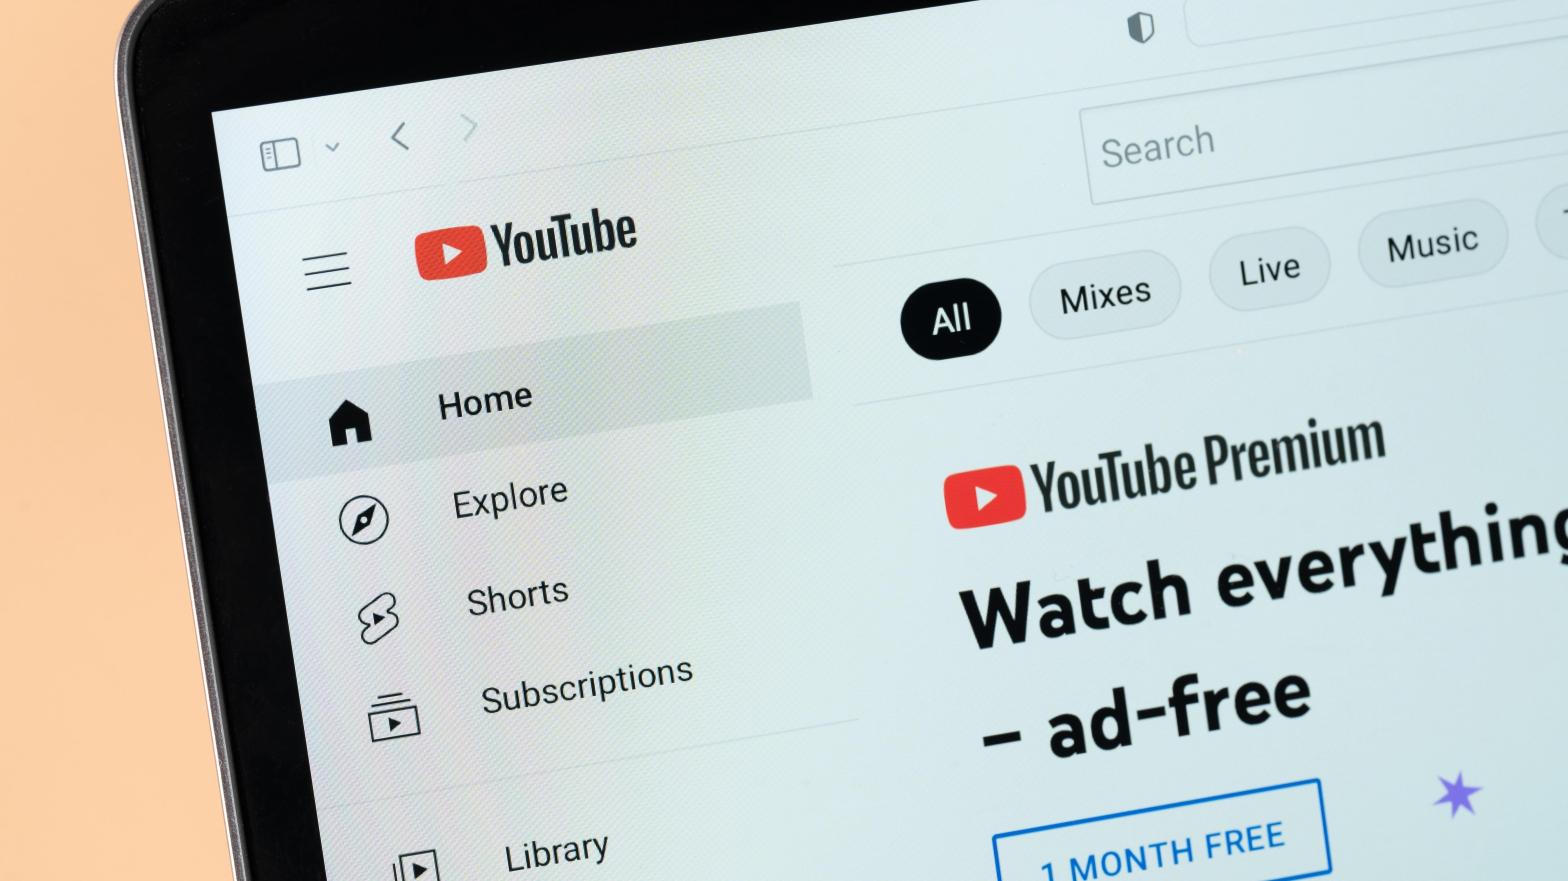 YouTube continues to push Premium even as the family plans have recently become more expensive. (Image: PixieMe)